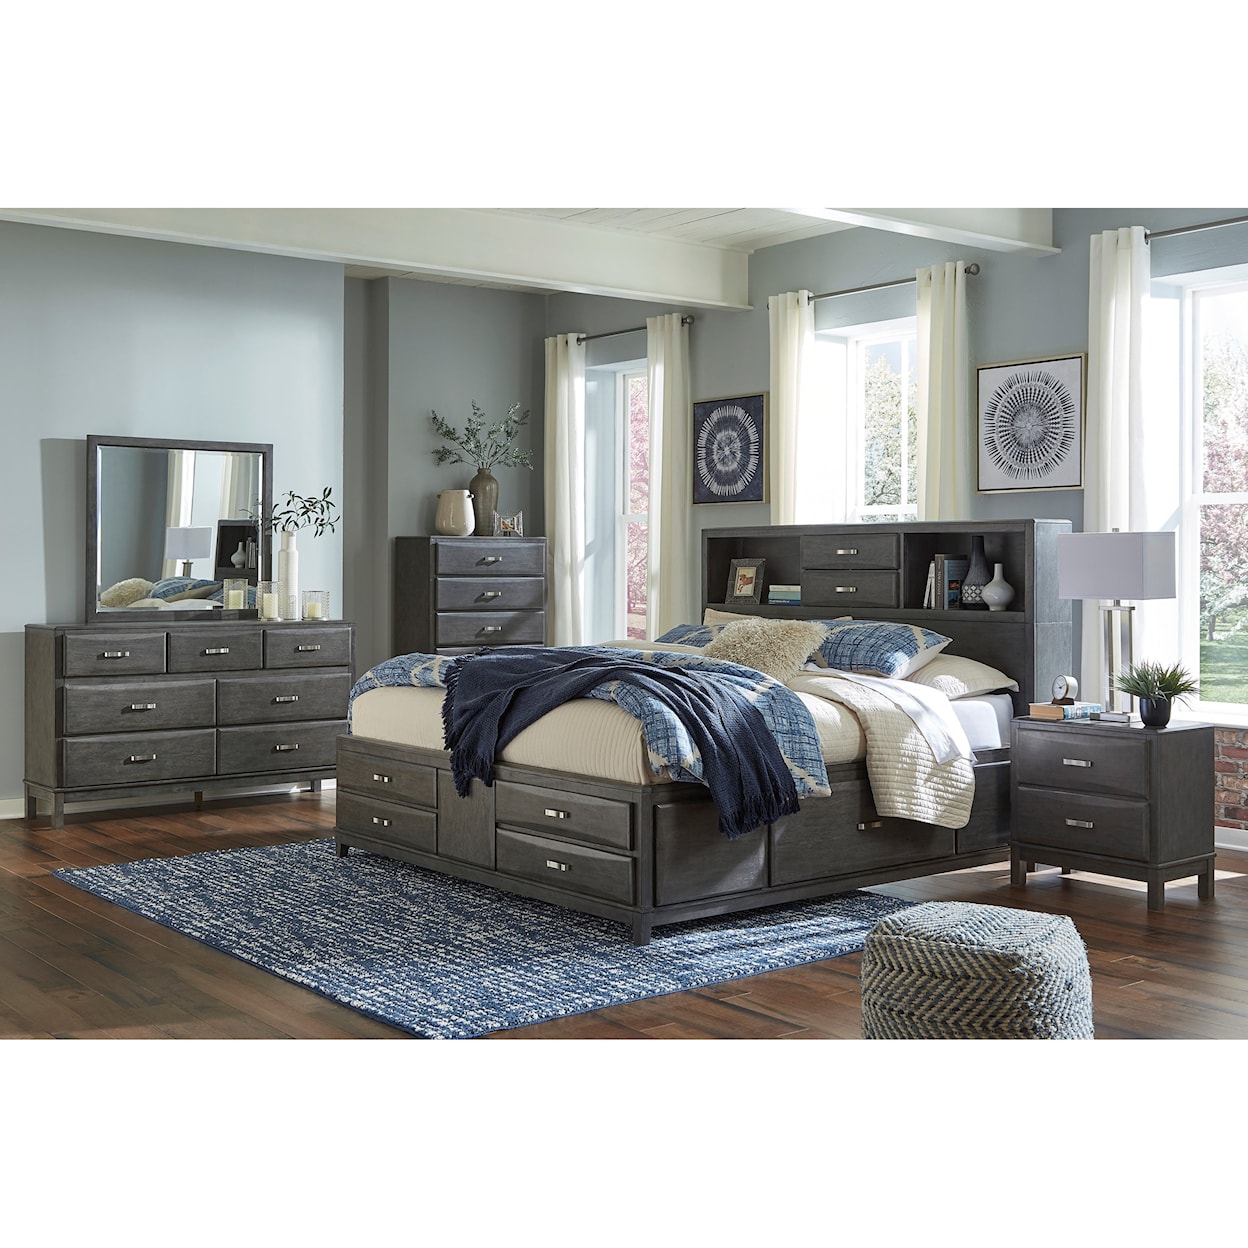 Signature Design by Ashley Caitbrook King Bedroom Group